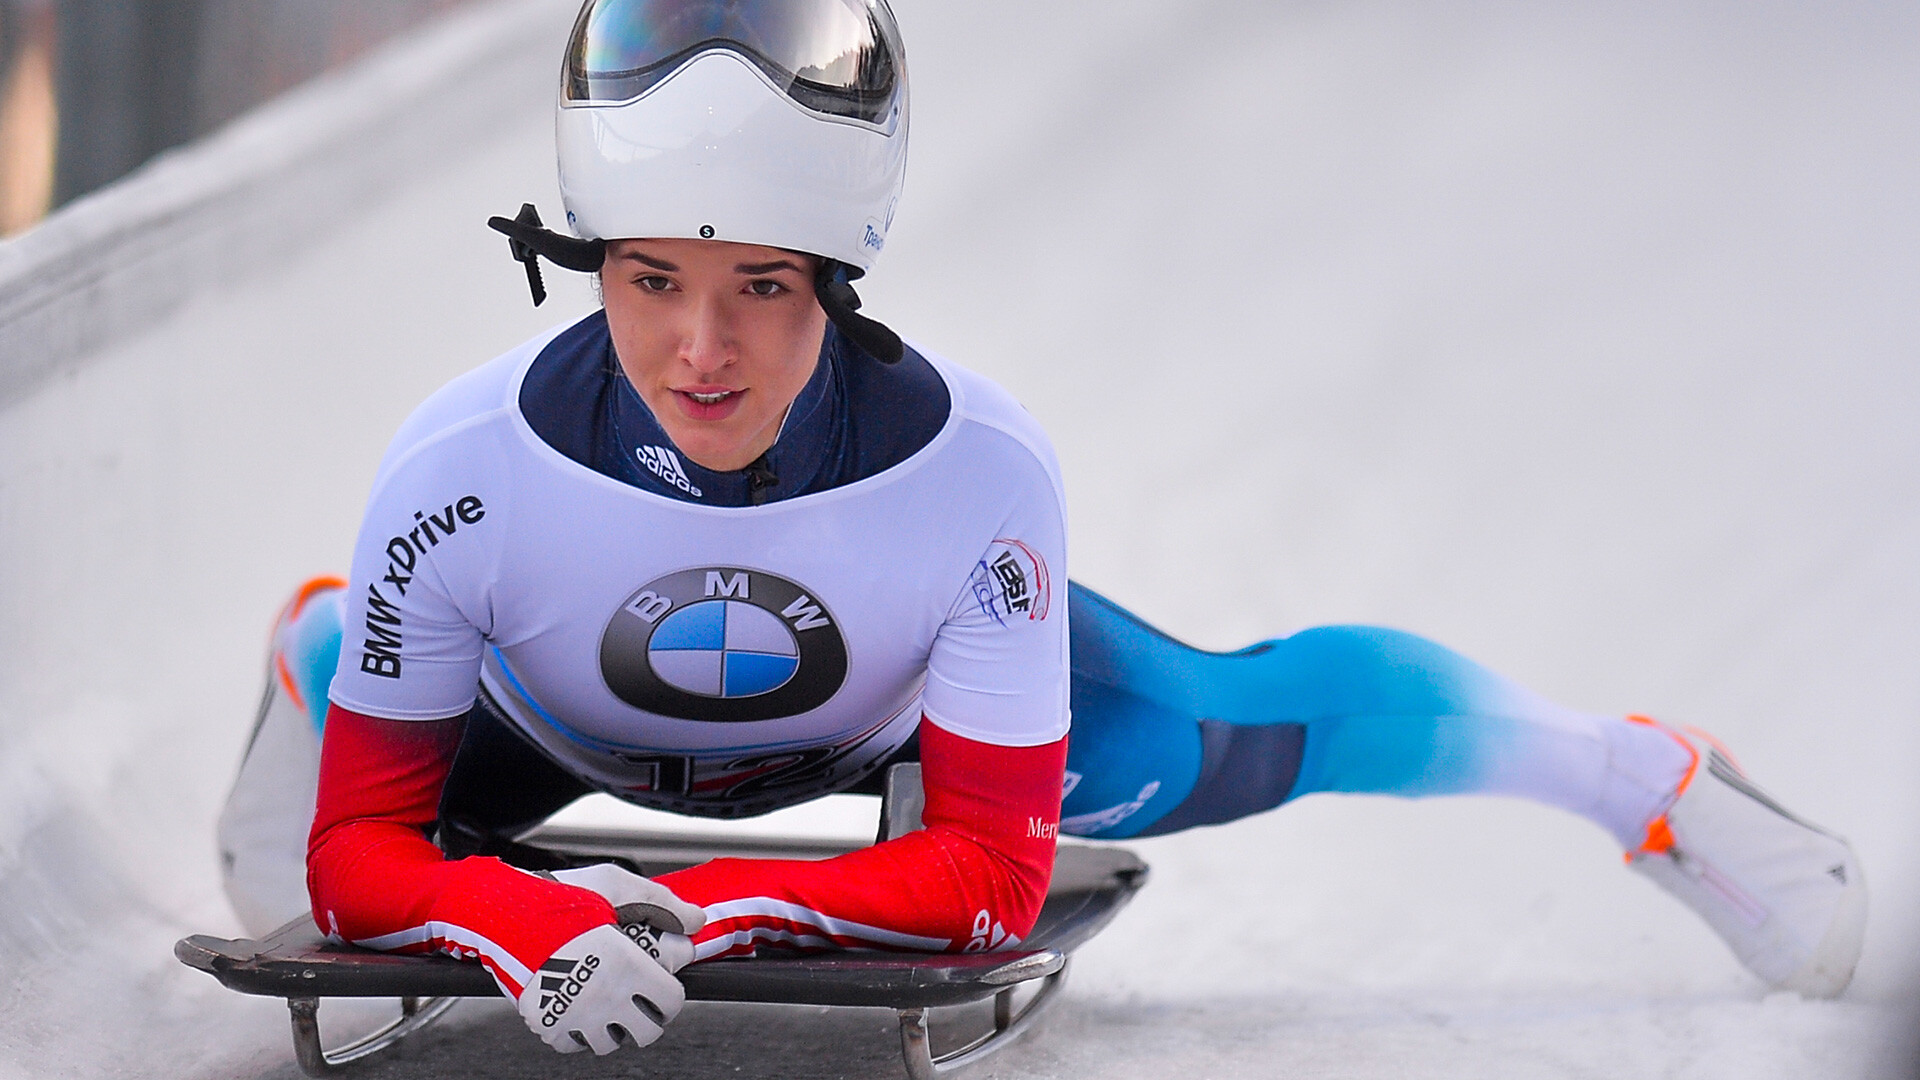 Yulia Kanakina at the finish of the women's skeleton competition at the third stage of the Bobsleigh and Skeleton World Cup in Koenigsee